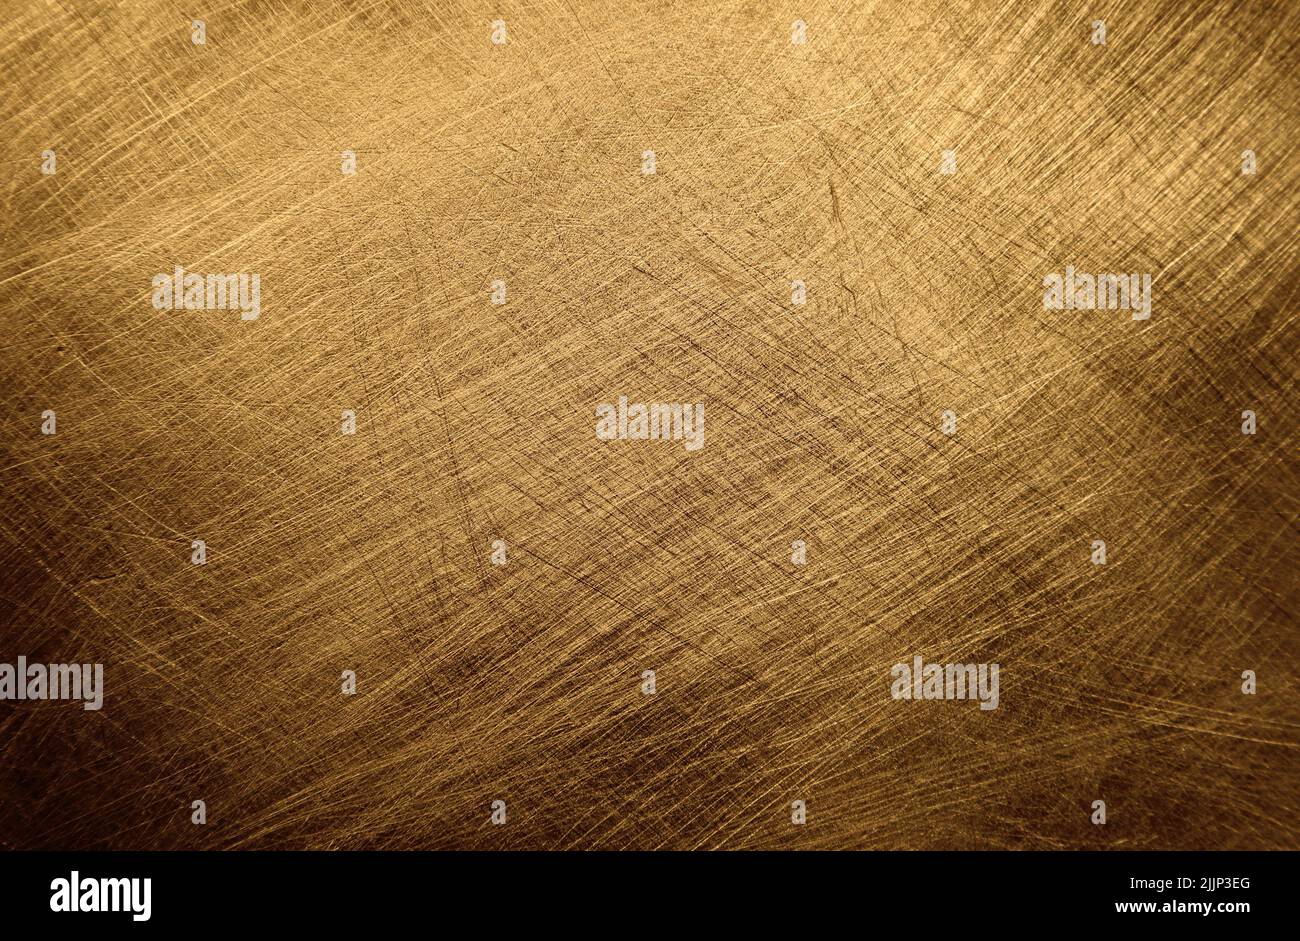 Gold brushed metal texture background Stock Photo